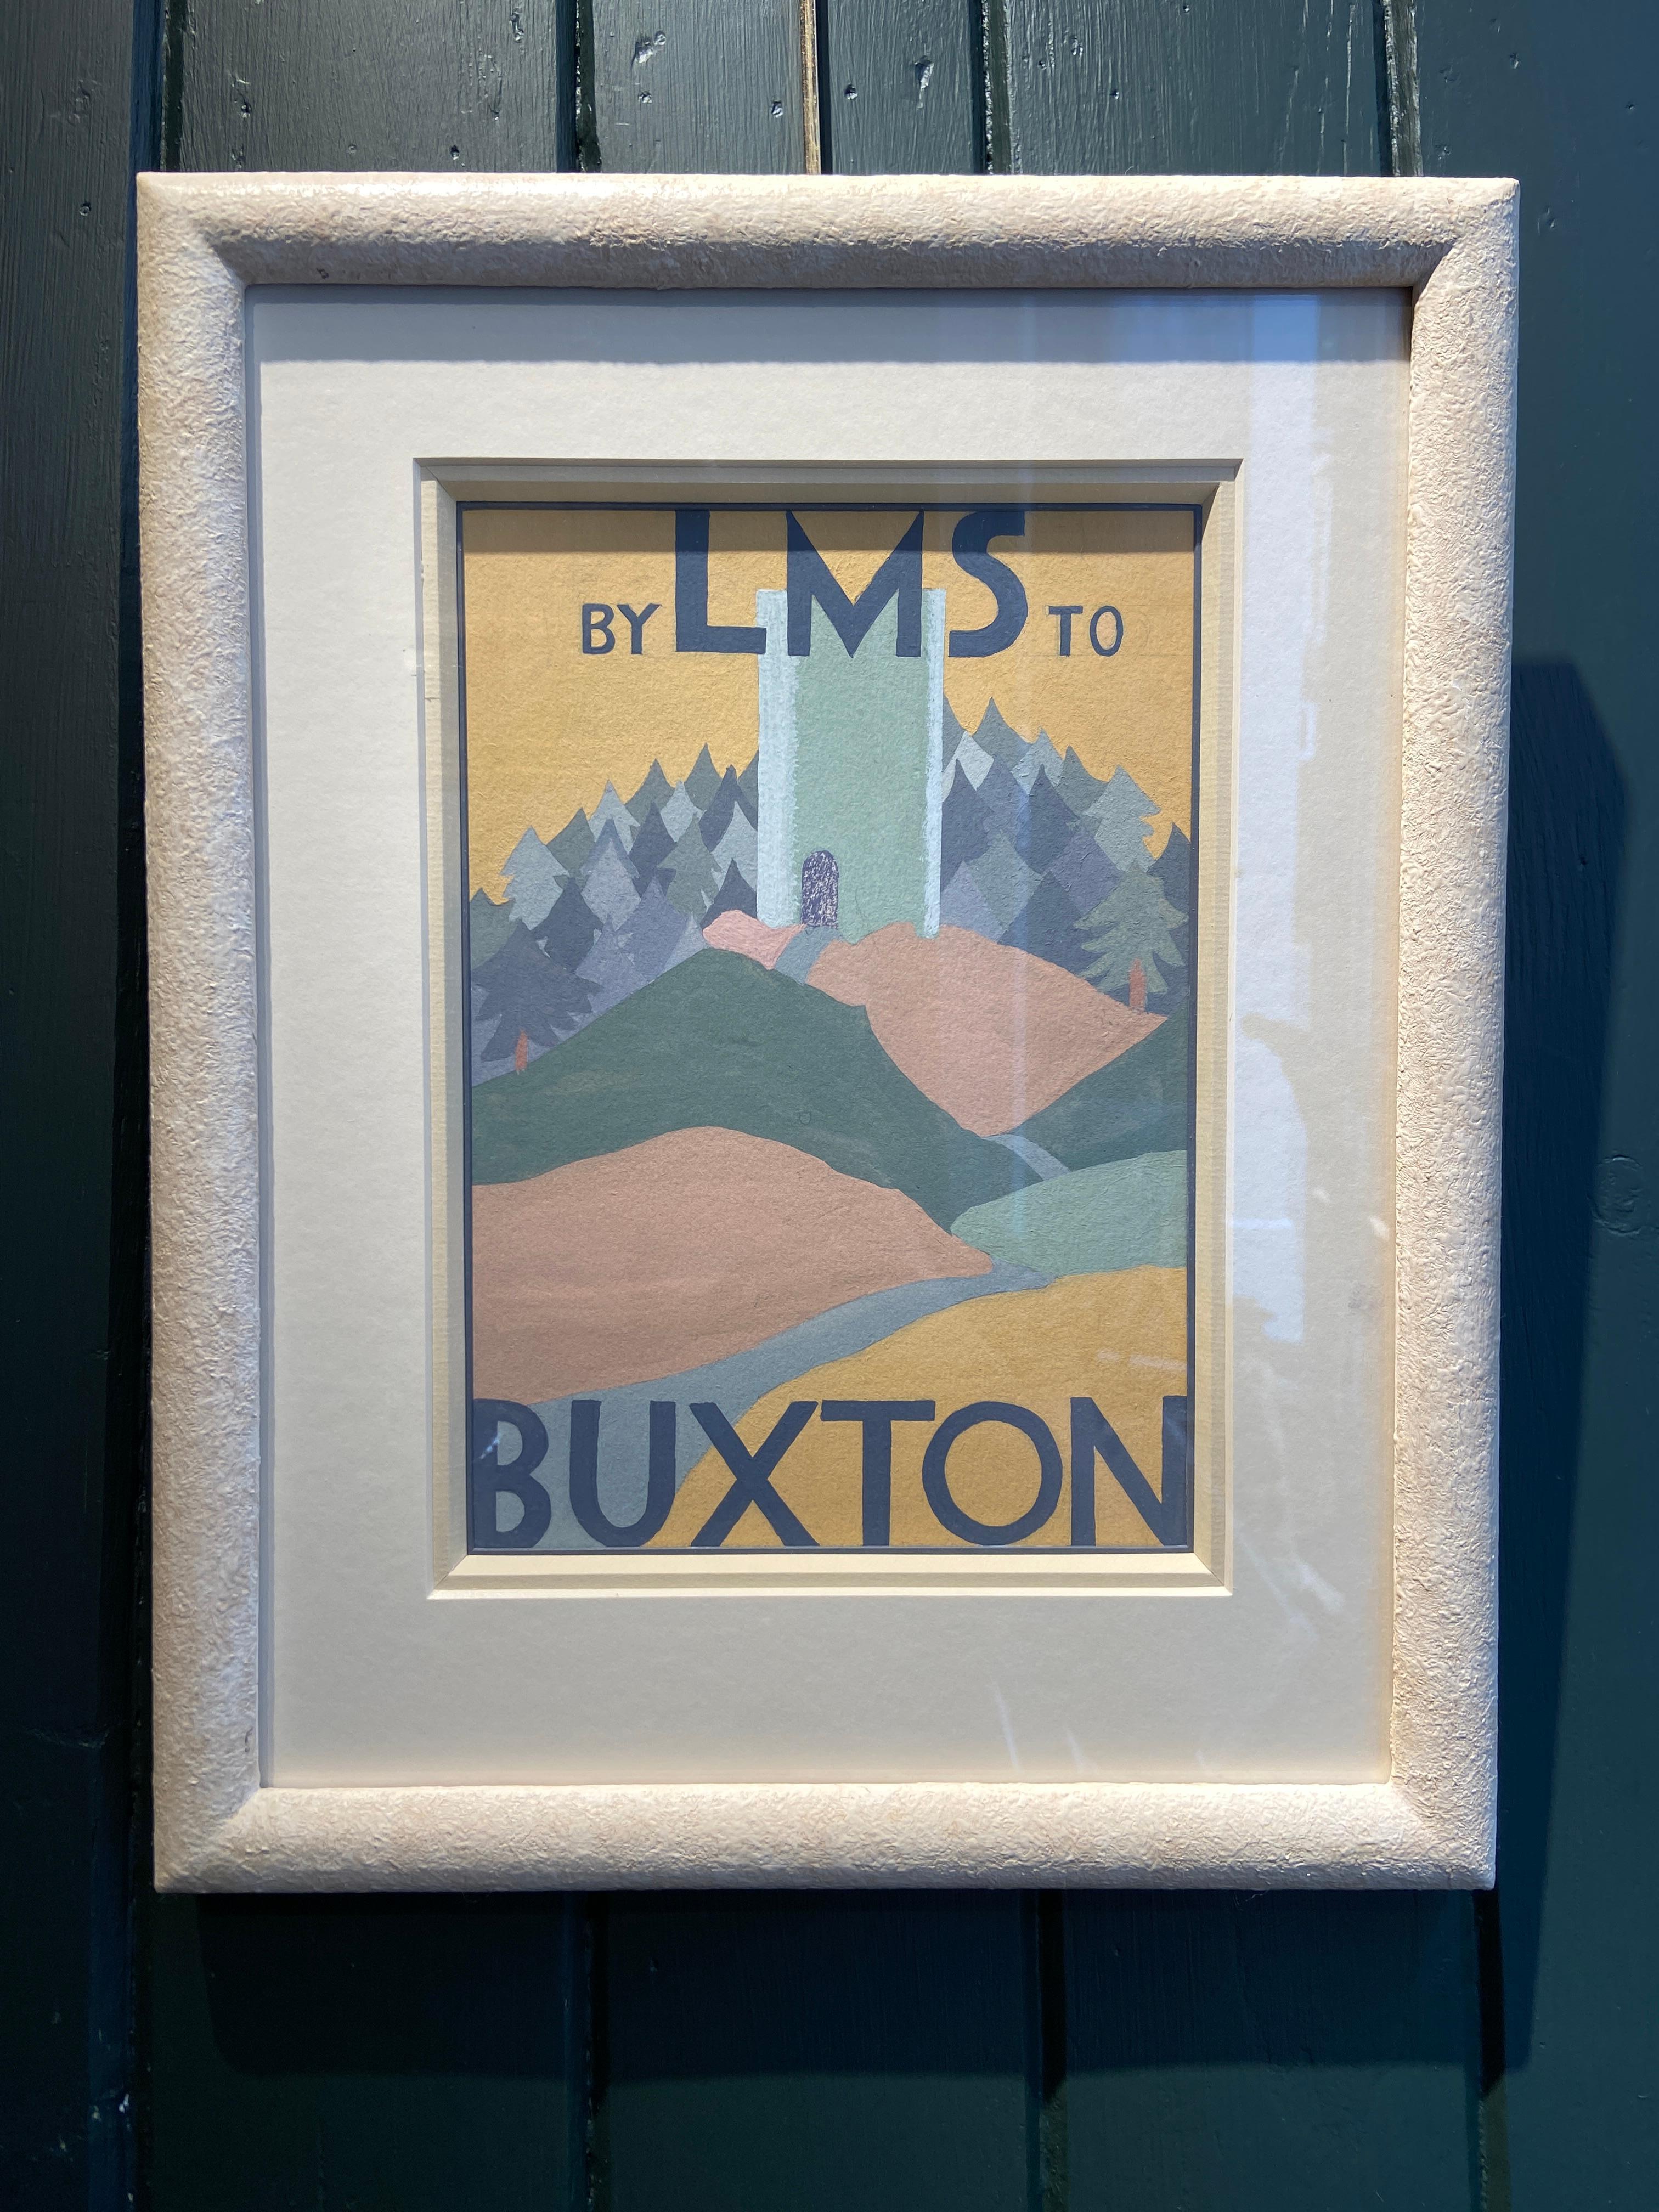 
English School
20th Century
By LMS to Buxton
Gouache on board
Image size: 6 1/4 x 9 inches (16 x 23 cm)
Contemporary Frame
Original artwork for a LMS poster. The London, Midland and Scottish Railway (LMS) was a British railway company that was